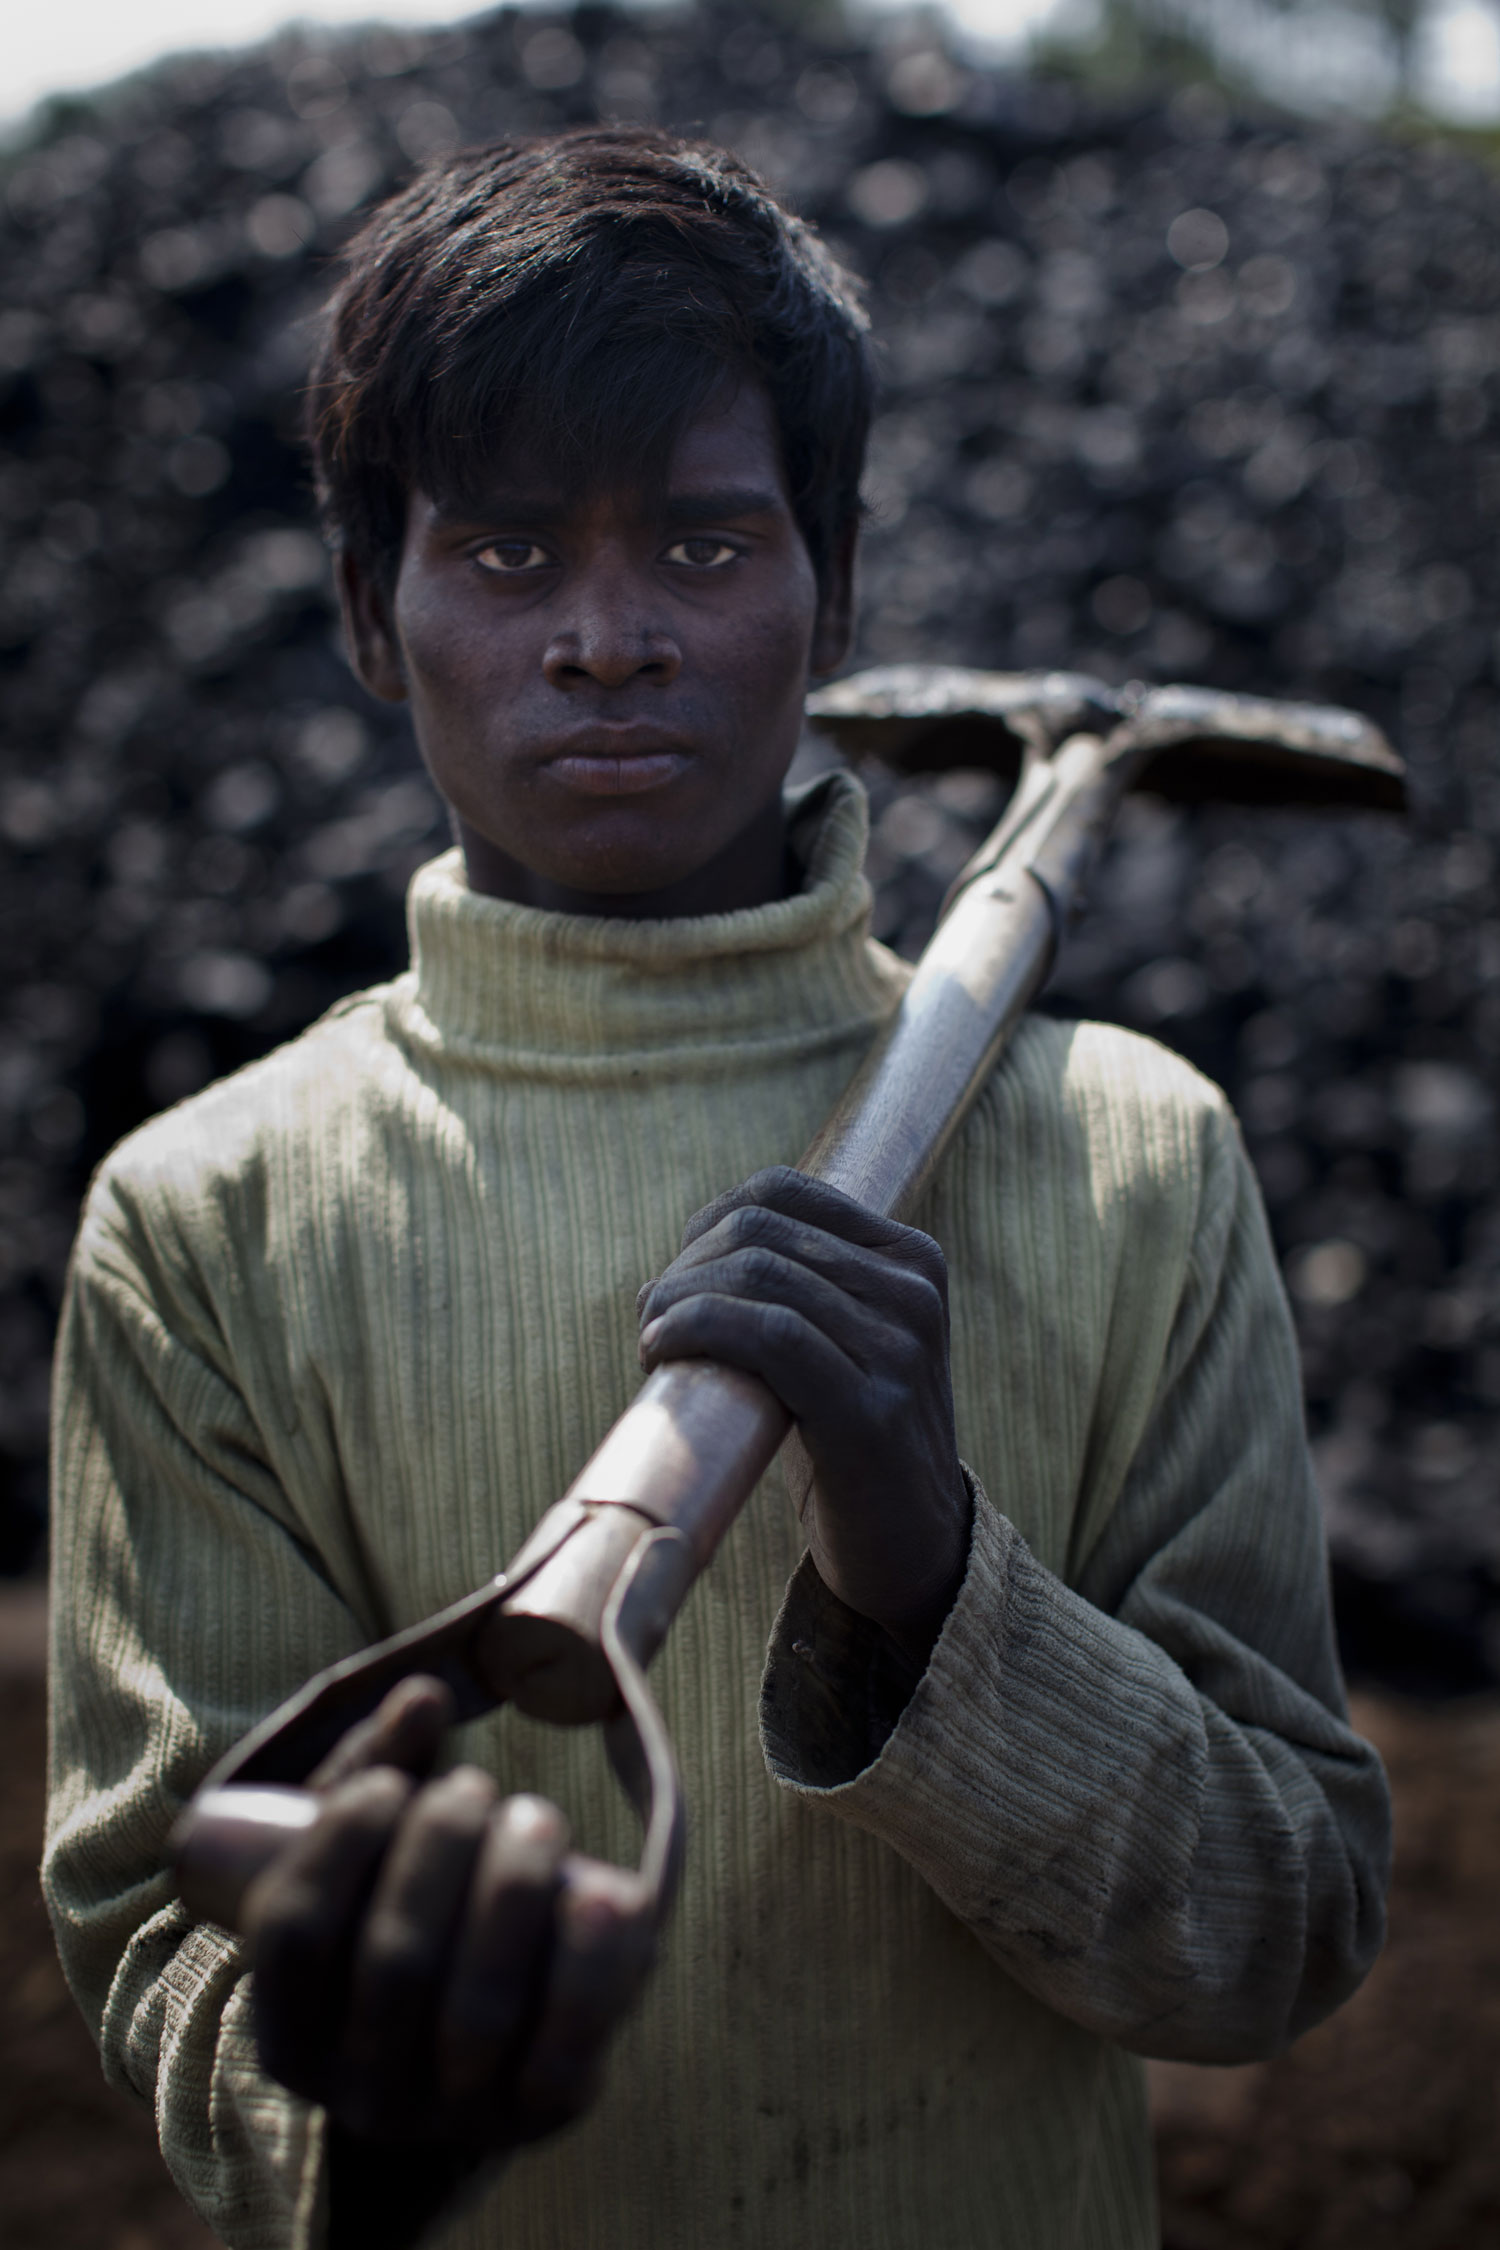 16 year old Rafaqui Islam, from Assam, poses for a portrait, whilst working at a coal depot shovelling coal to be crushed.